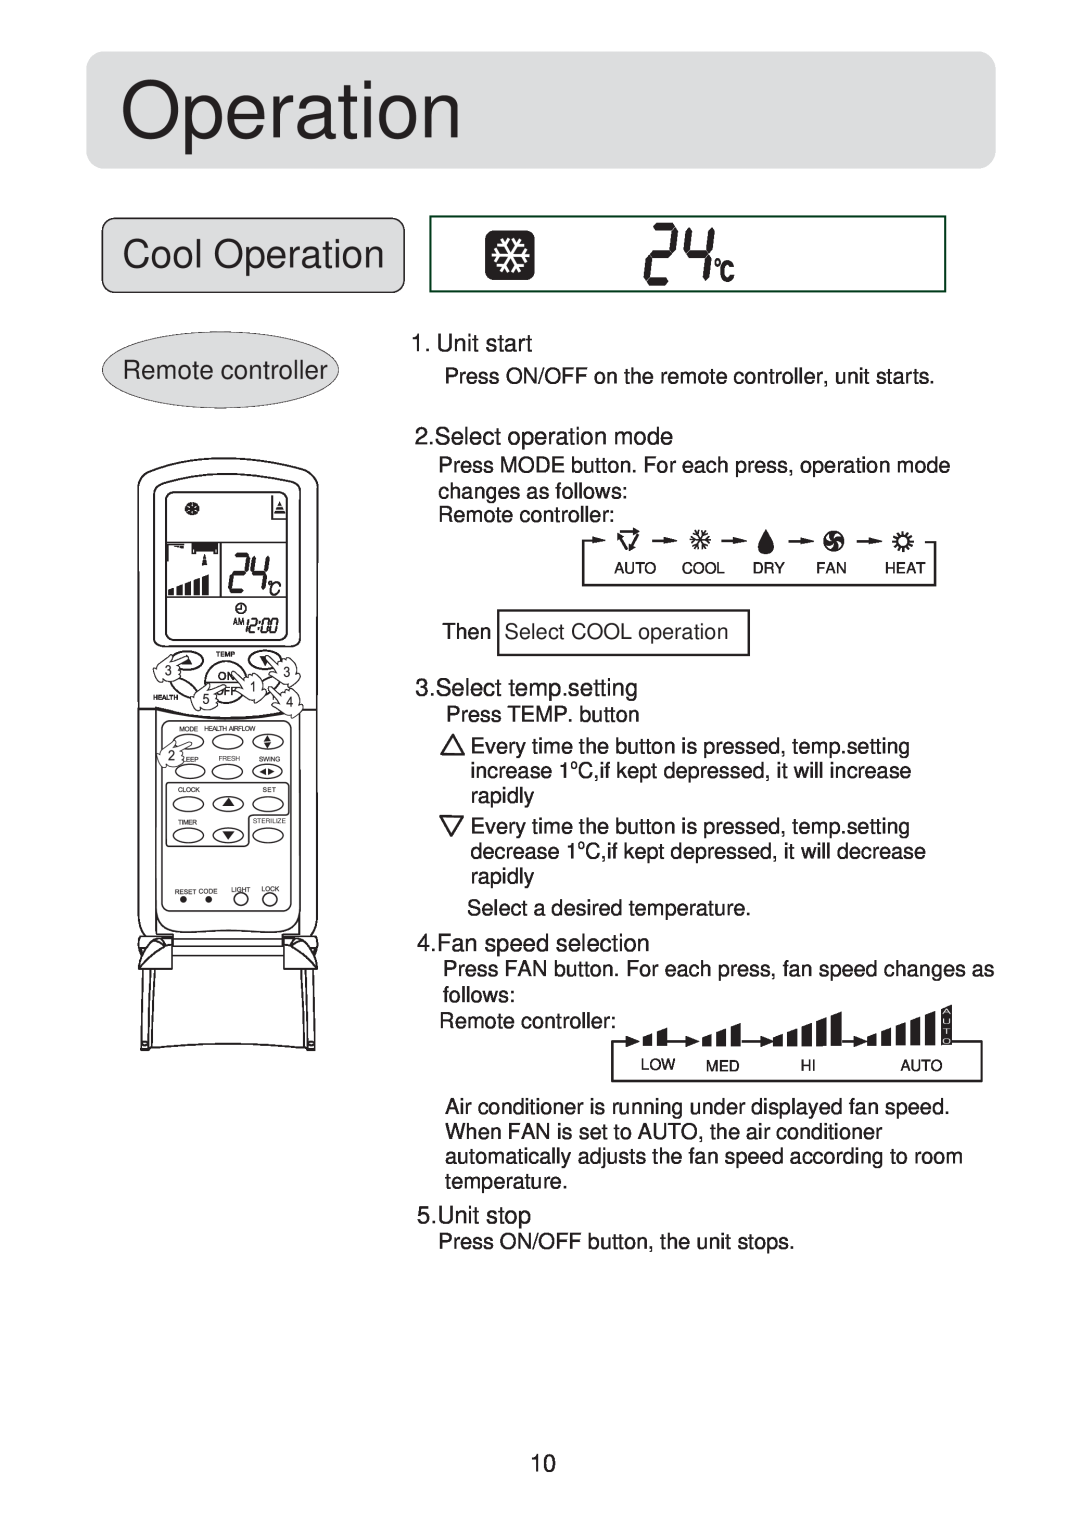 Haier HSU-24CV03(T3) Cool Operation, Remote controller, Unit start, Select operation mode, Select temp.setting, Unit stop 